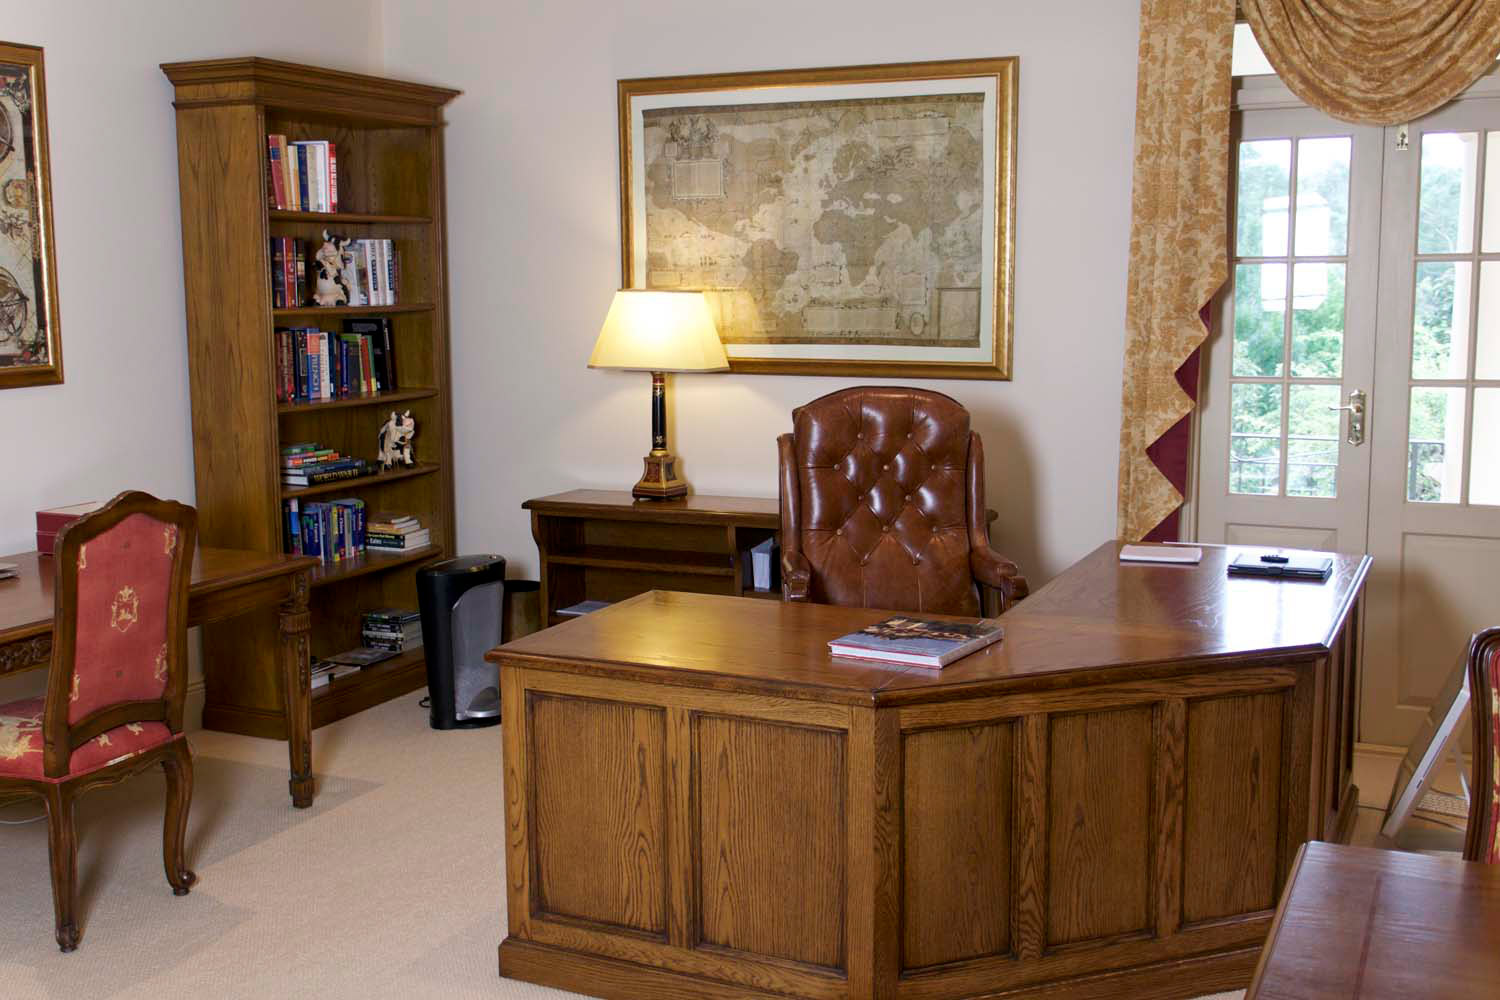 9 Formal study or office with french furniture and curtains with armchair and lamp